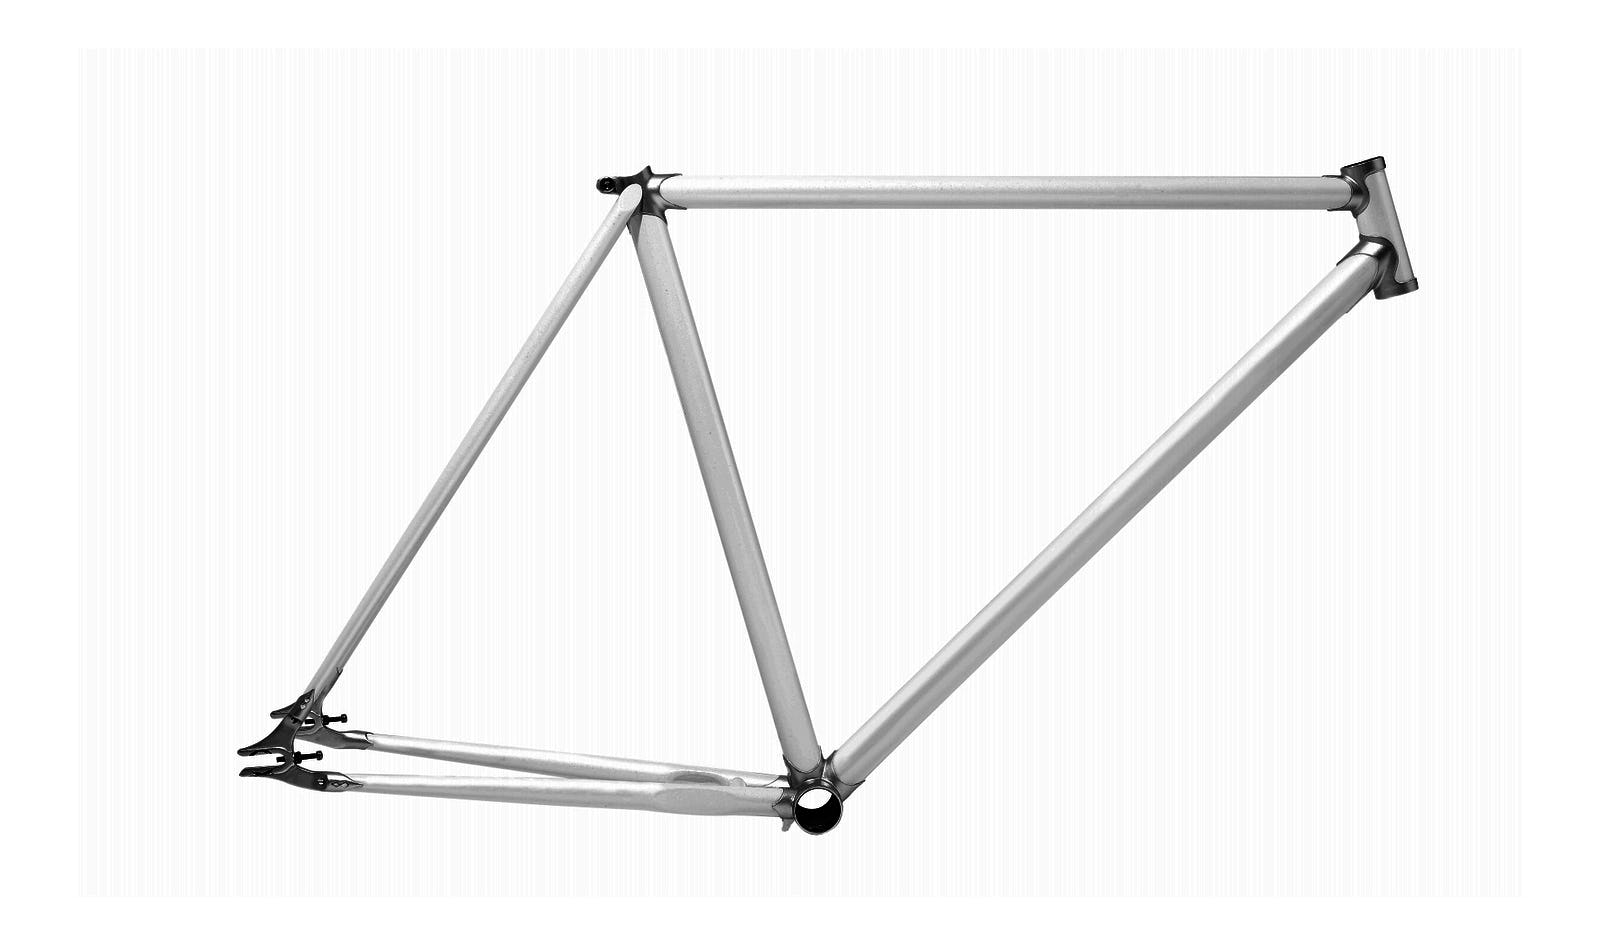 Ideation Industrial Retro Lugged Fix Gear Frame and Fork